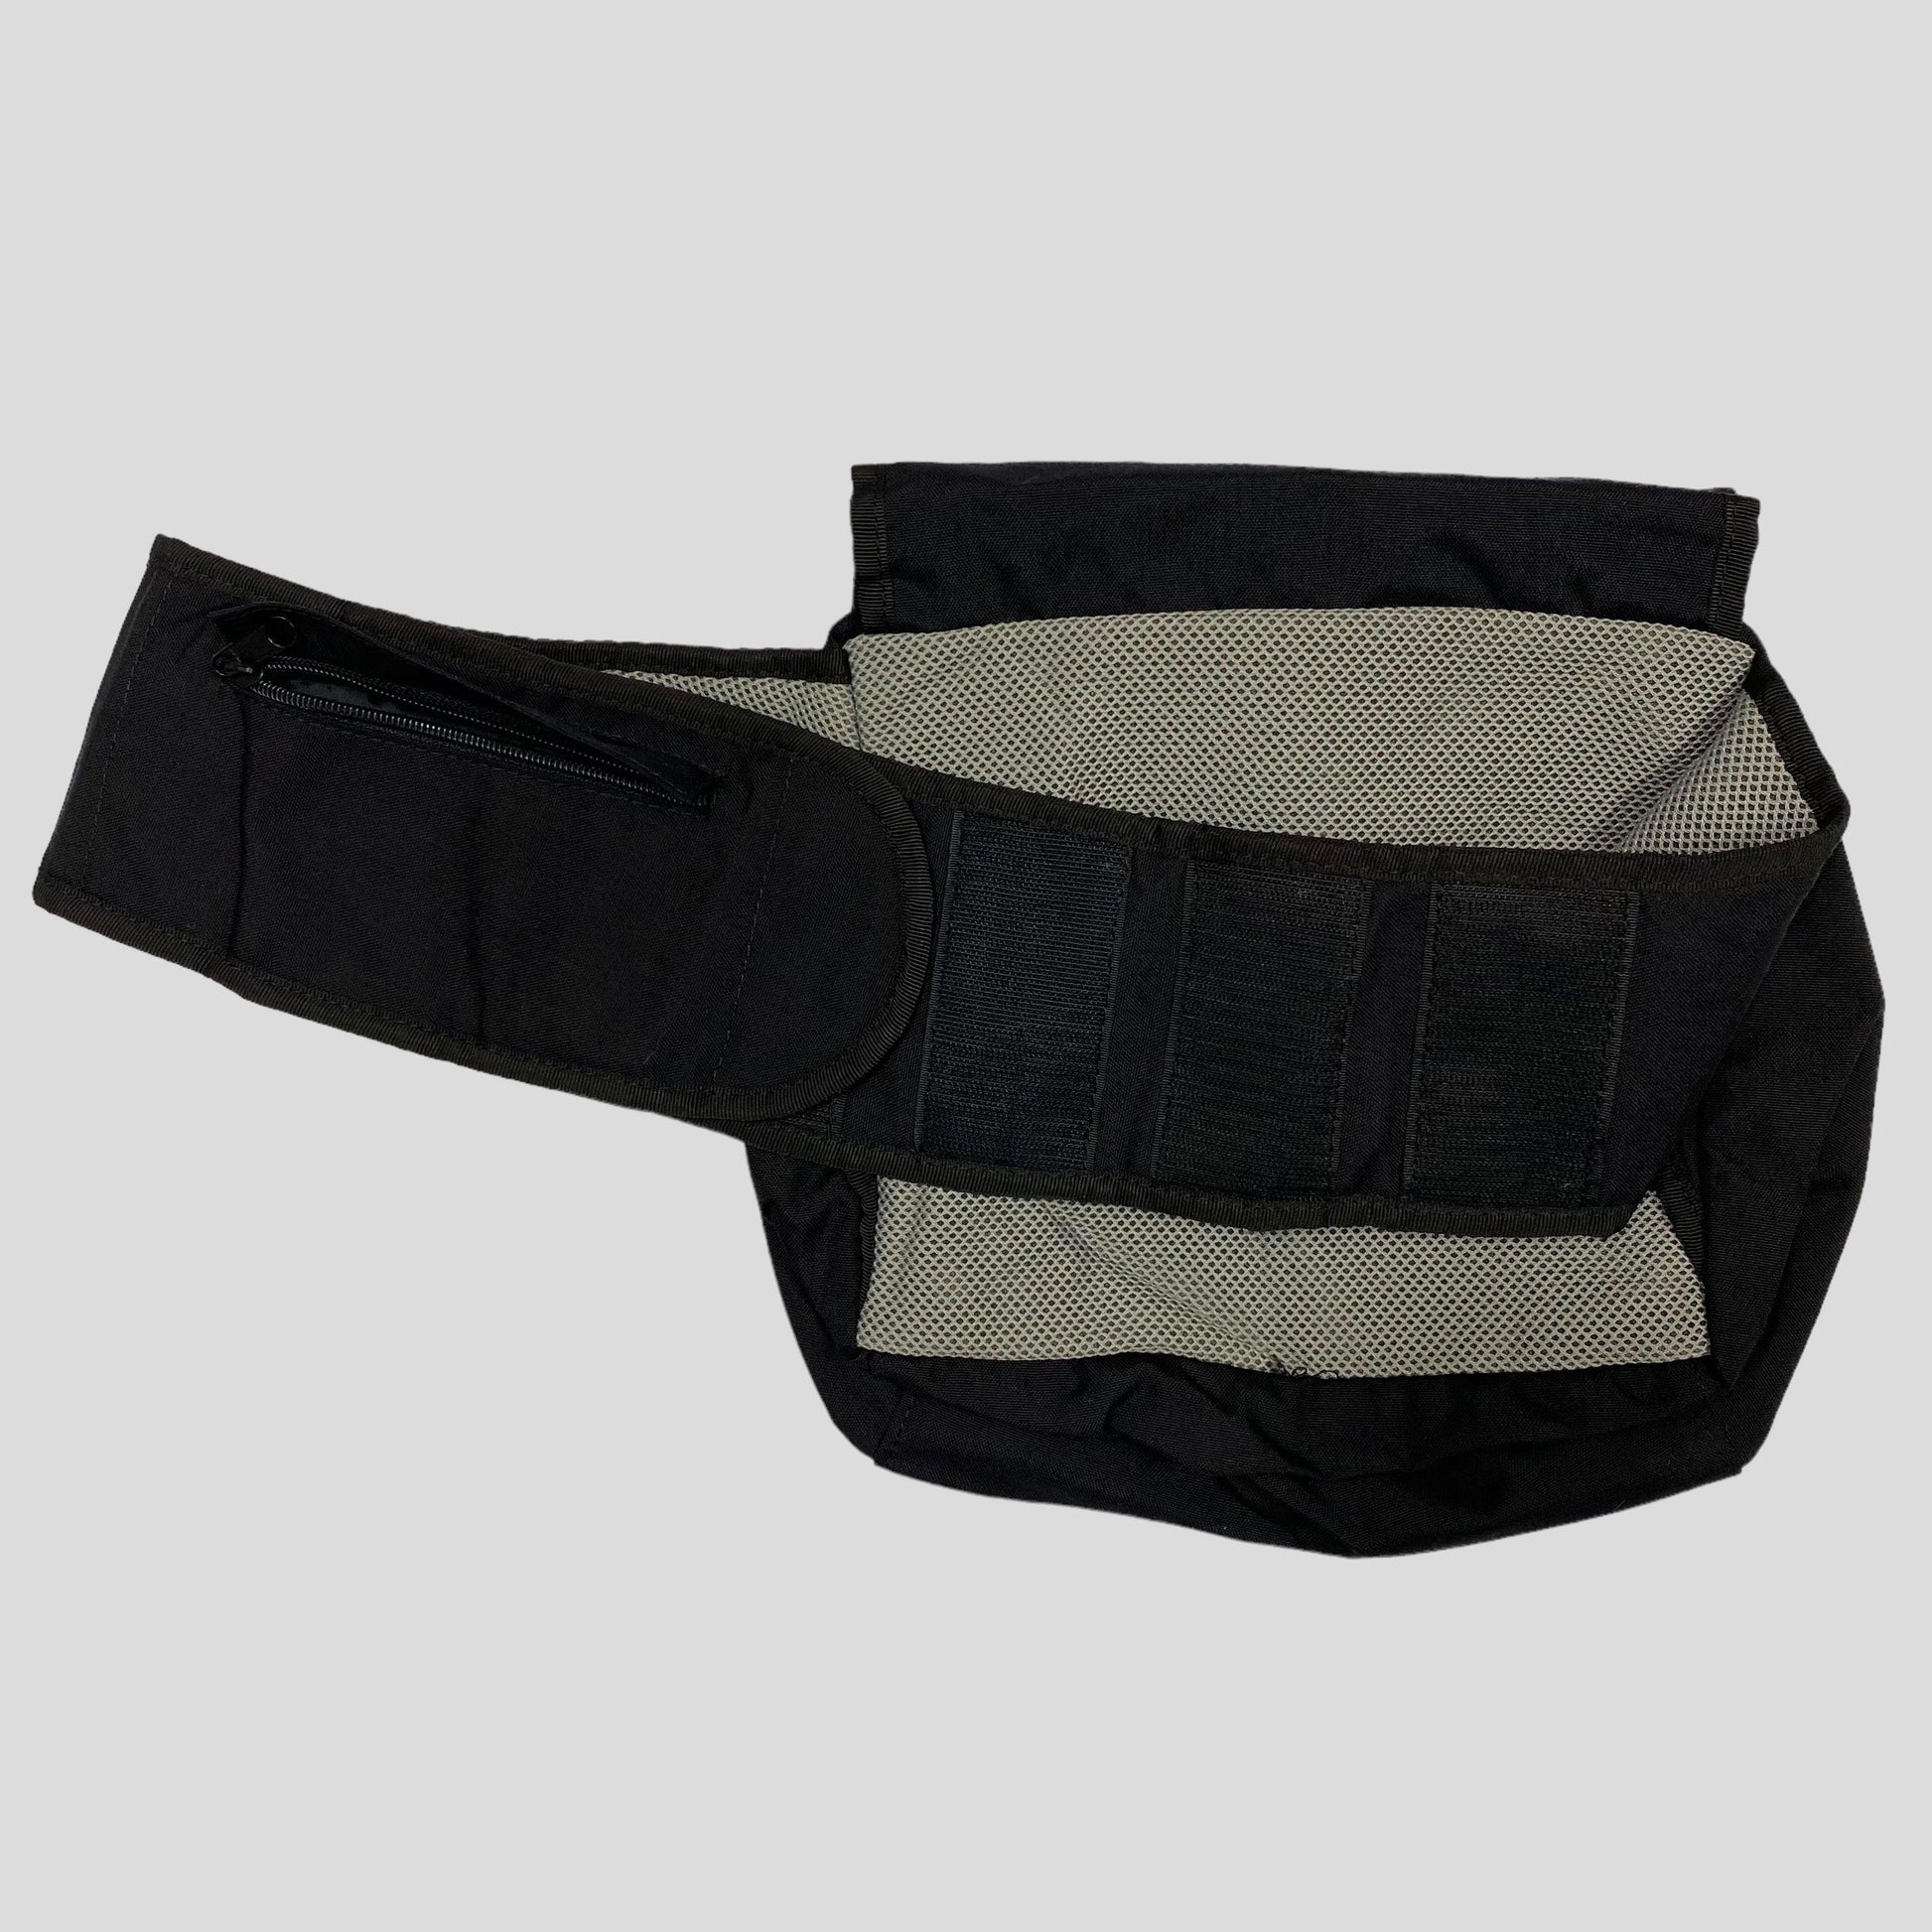 IS Island 00’s Tactical Waistbag - Black - Known Source